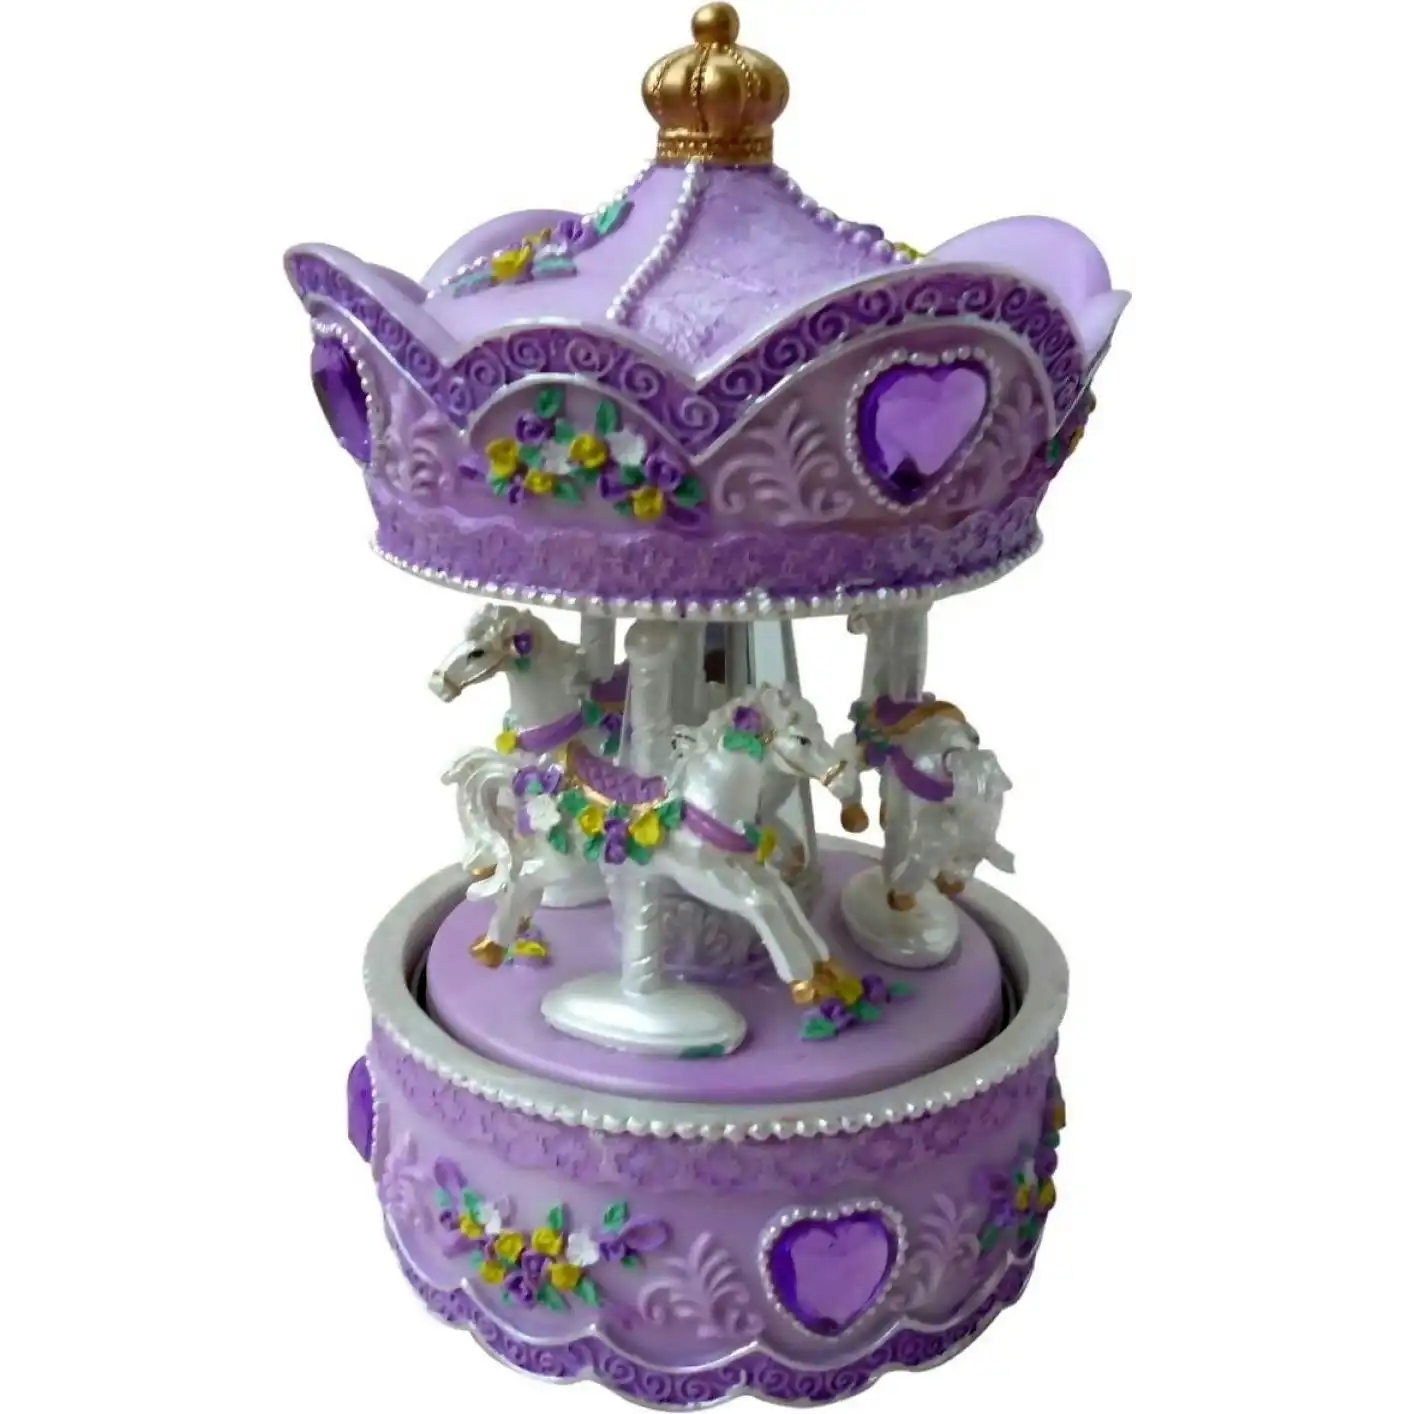 Cotton Candy - Musical Wind Up 3 Horse Carousel Mauve With Flower Detailing 6-inch